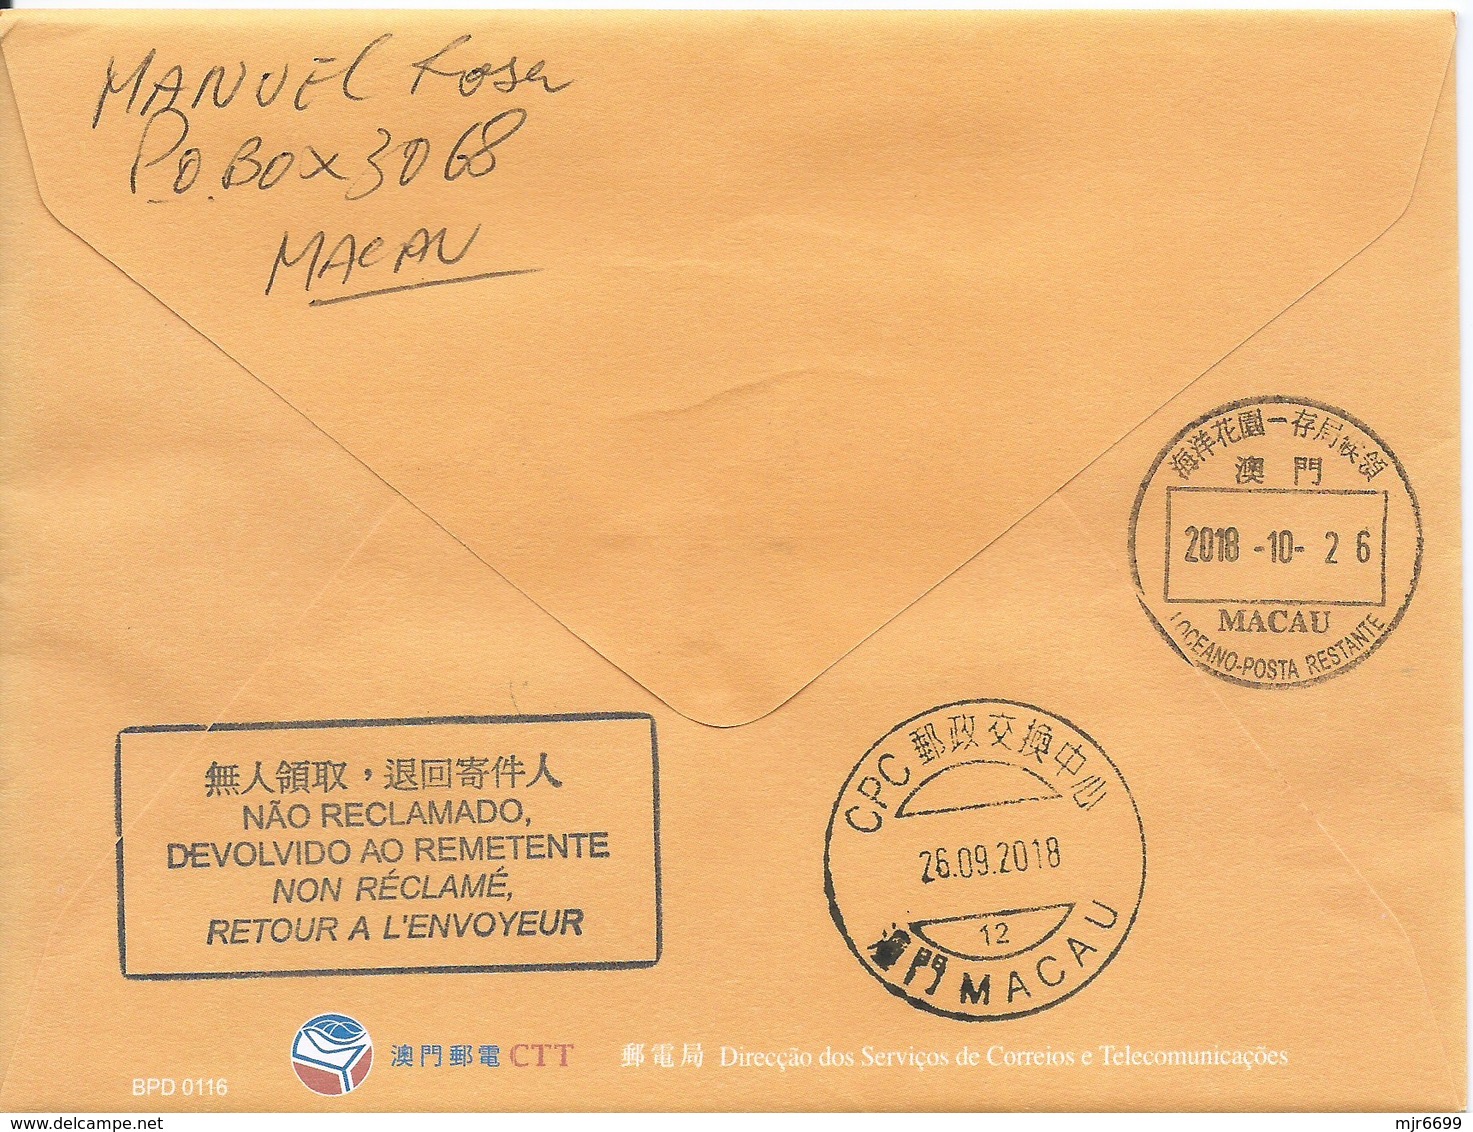 MACAU 2018 LUNAR YEAR OF THE DOG GREETING CARD & POSTAGE PAID COVER TO TAIPA W\TEMPORARY CANCEL - Postal Stationery